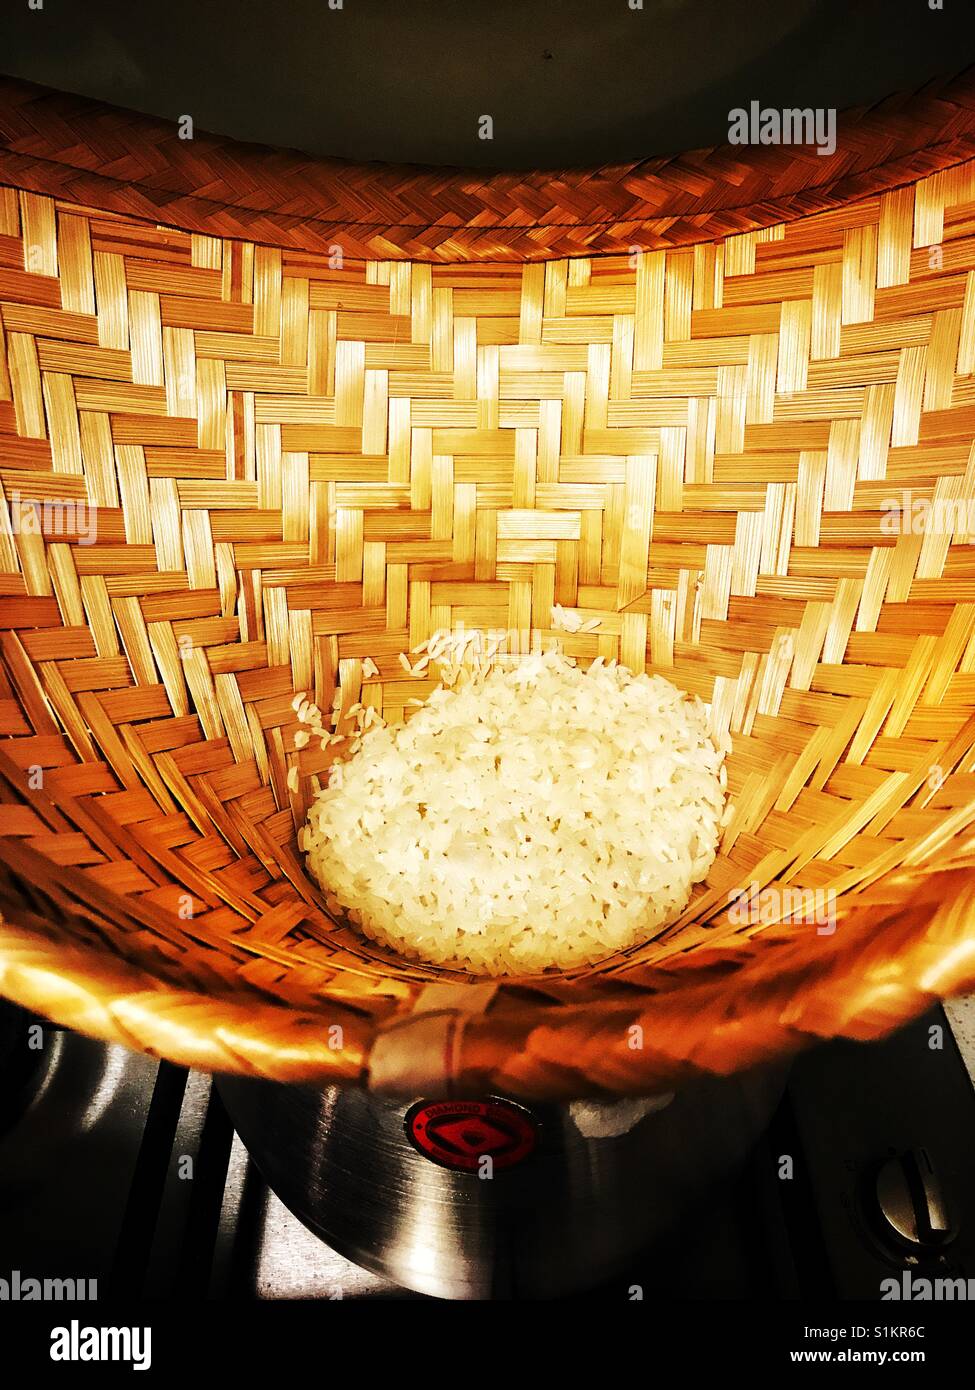 Cooking sticky rice in bamboo basket Stock Photo